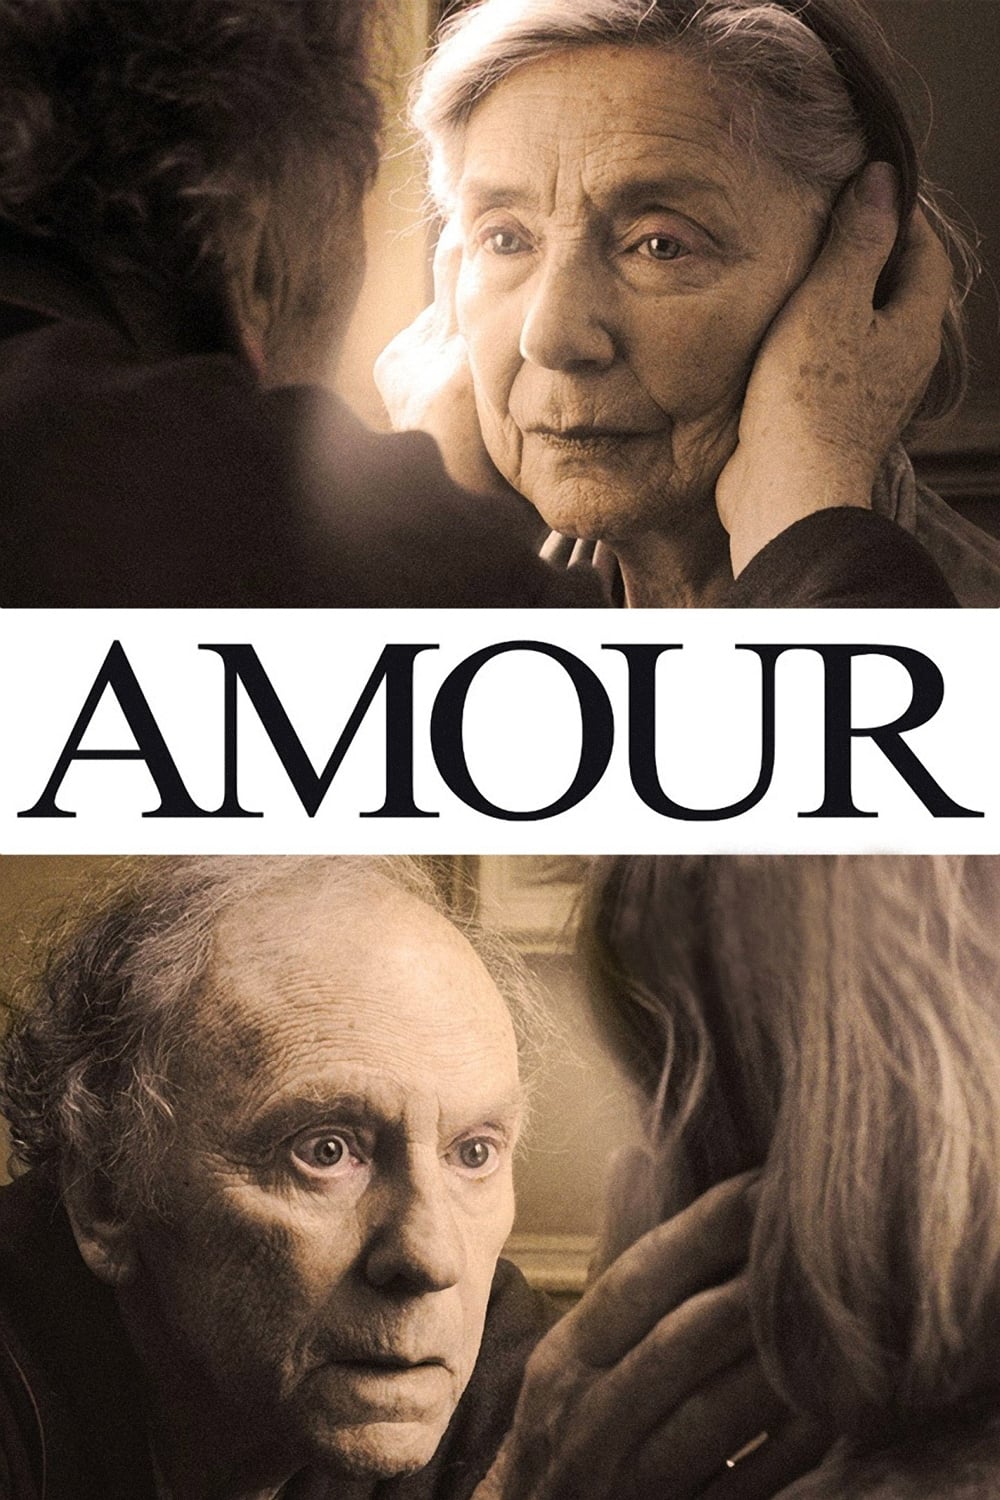 Amour [HD] (2012)